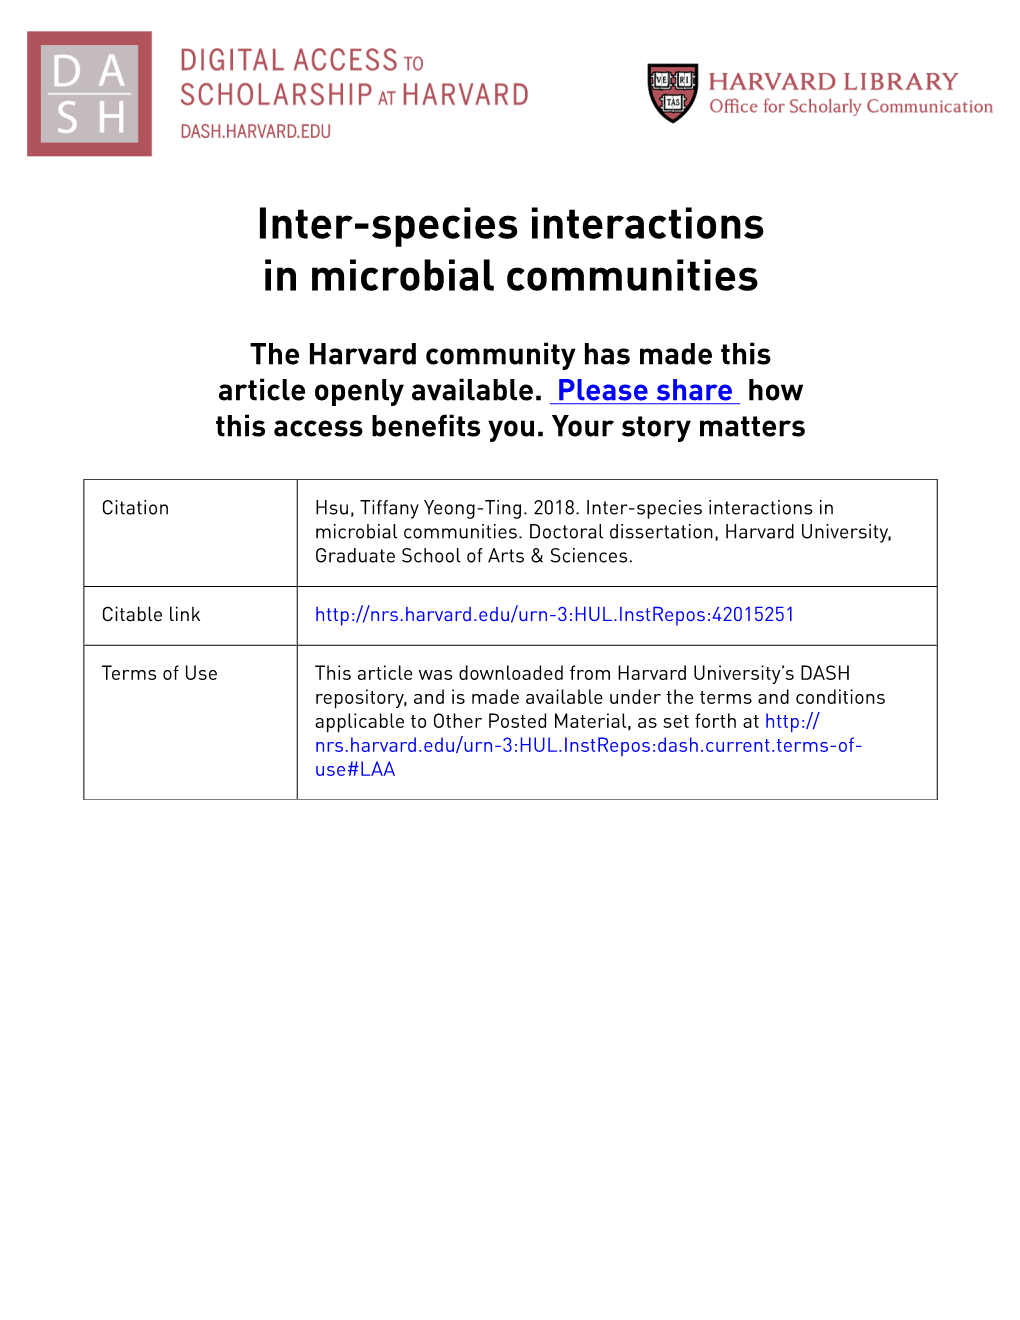 Inter-Species Interactions in Microbial Communities